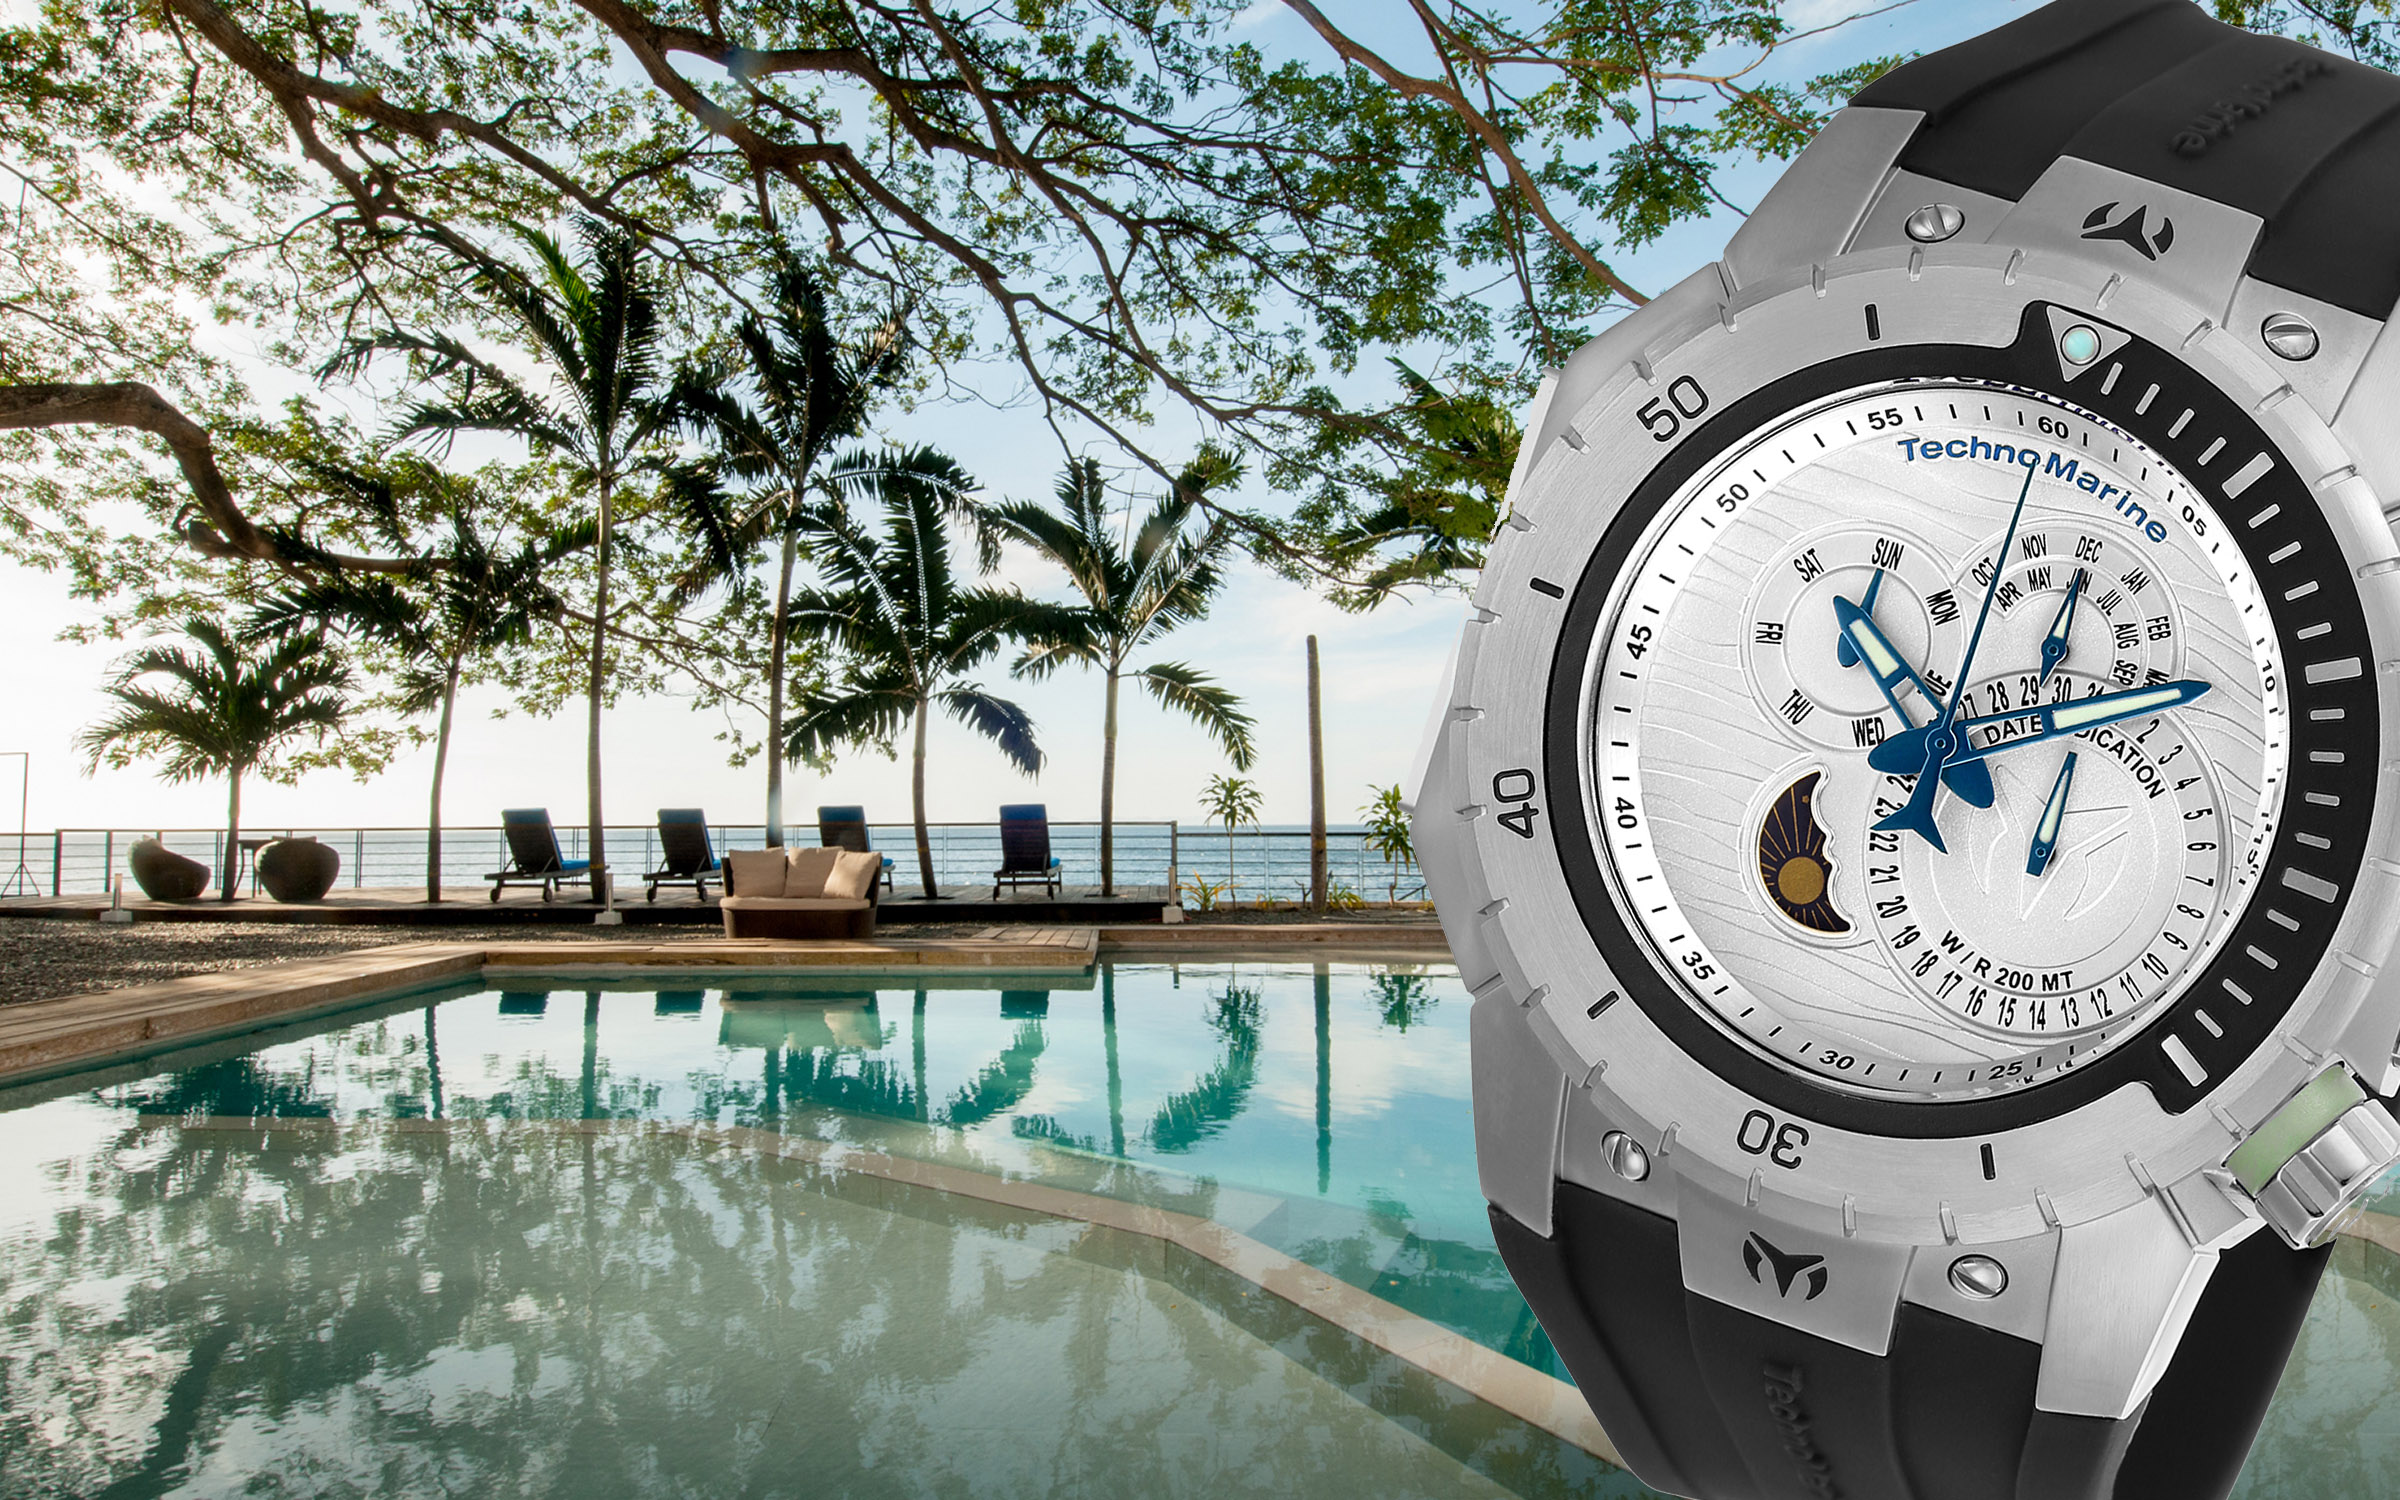 Get a chance to win a scuba diving adventure with TechnoMarine